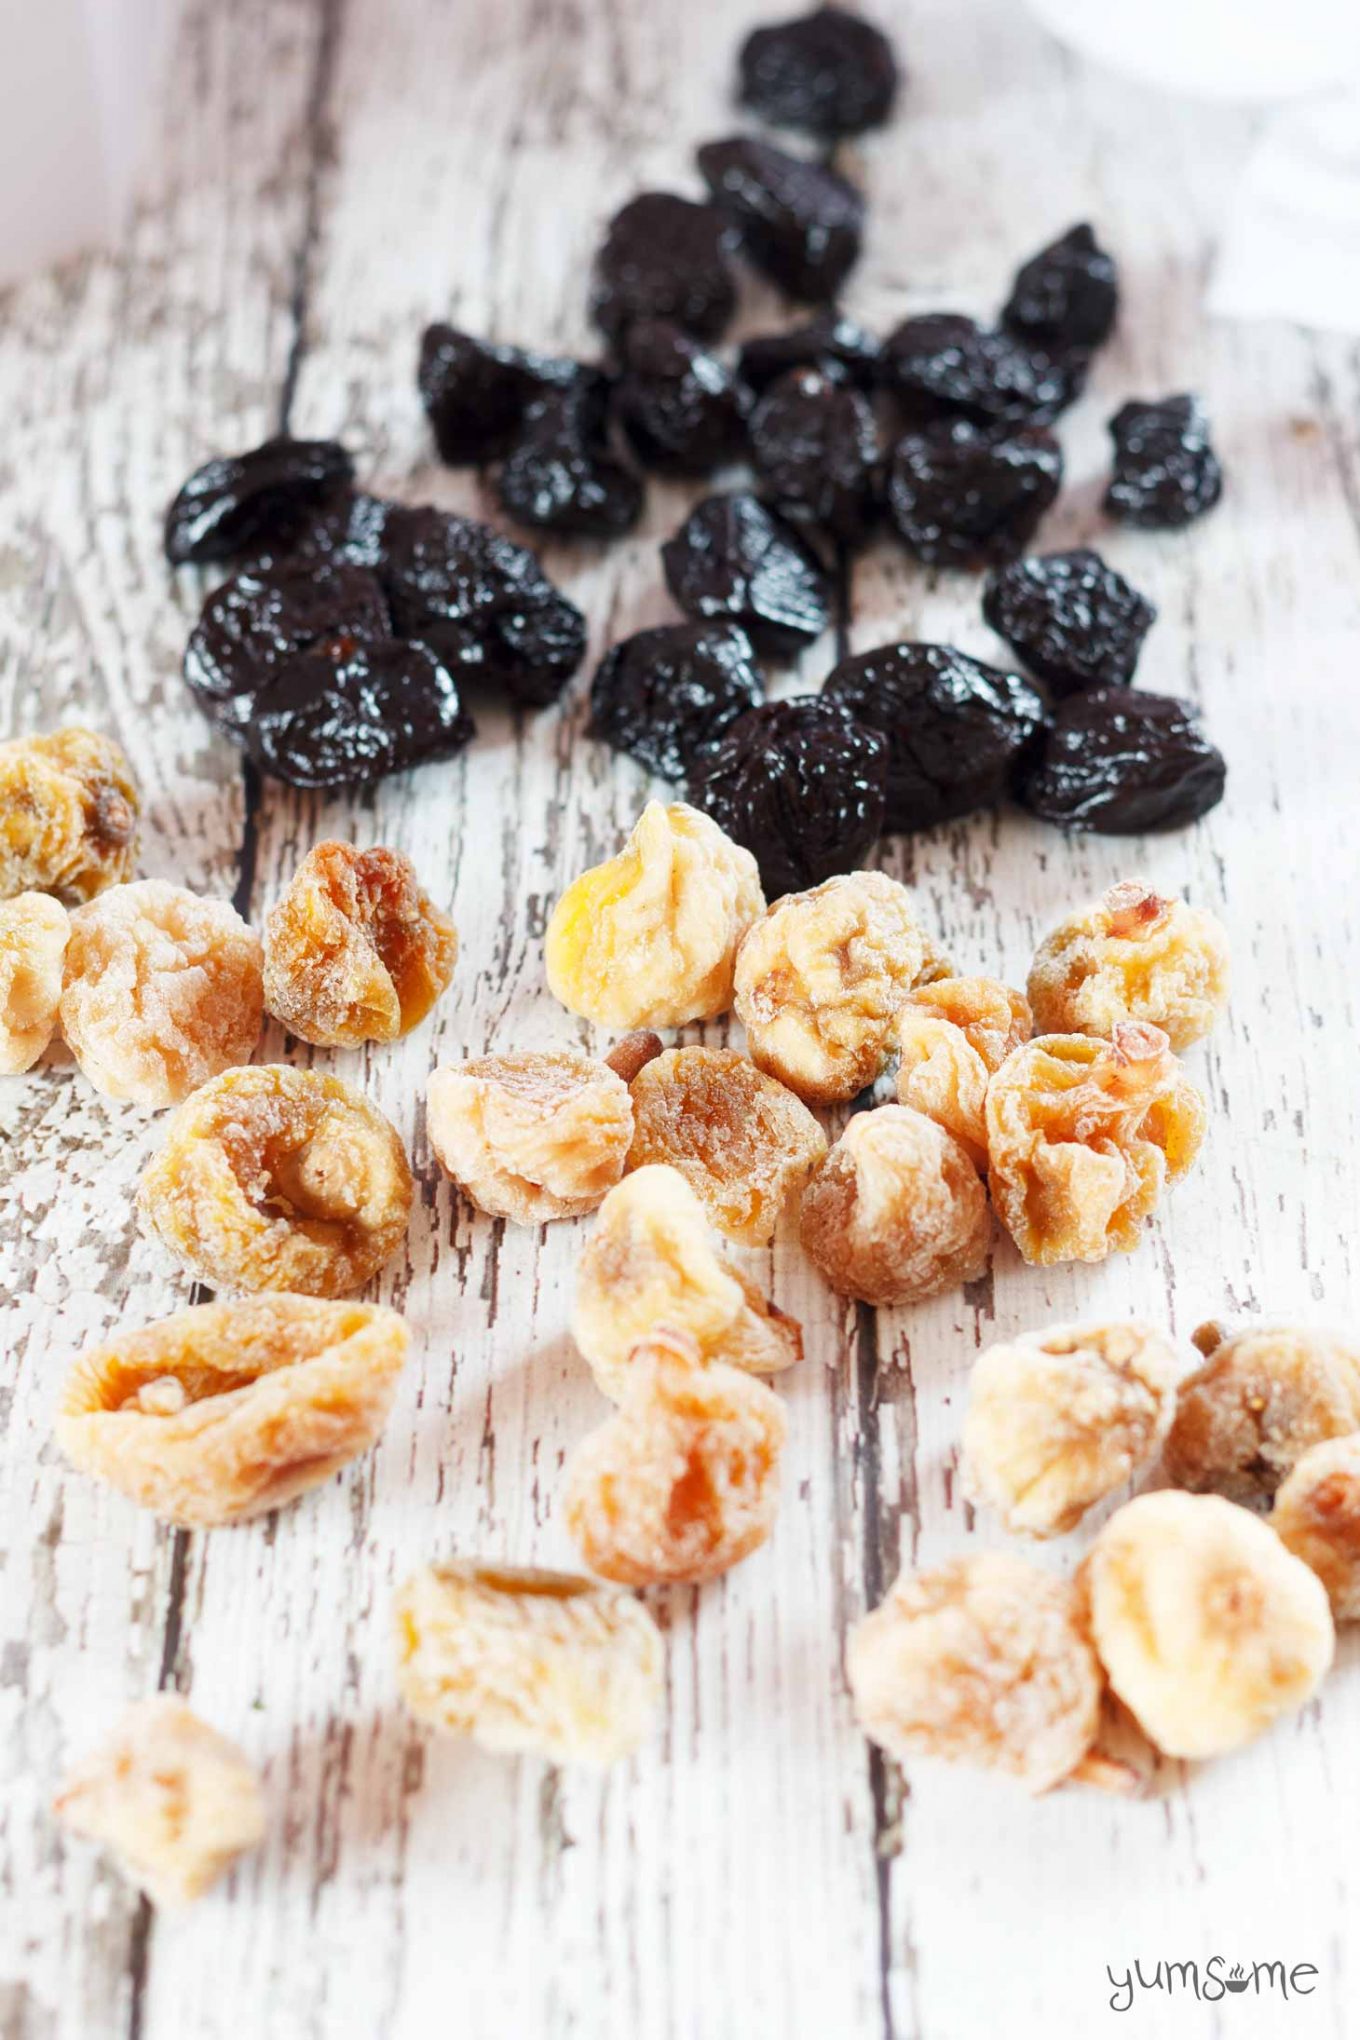 prunes and figs from Croatia | yumsome.com